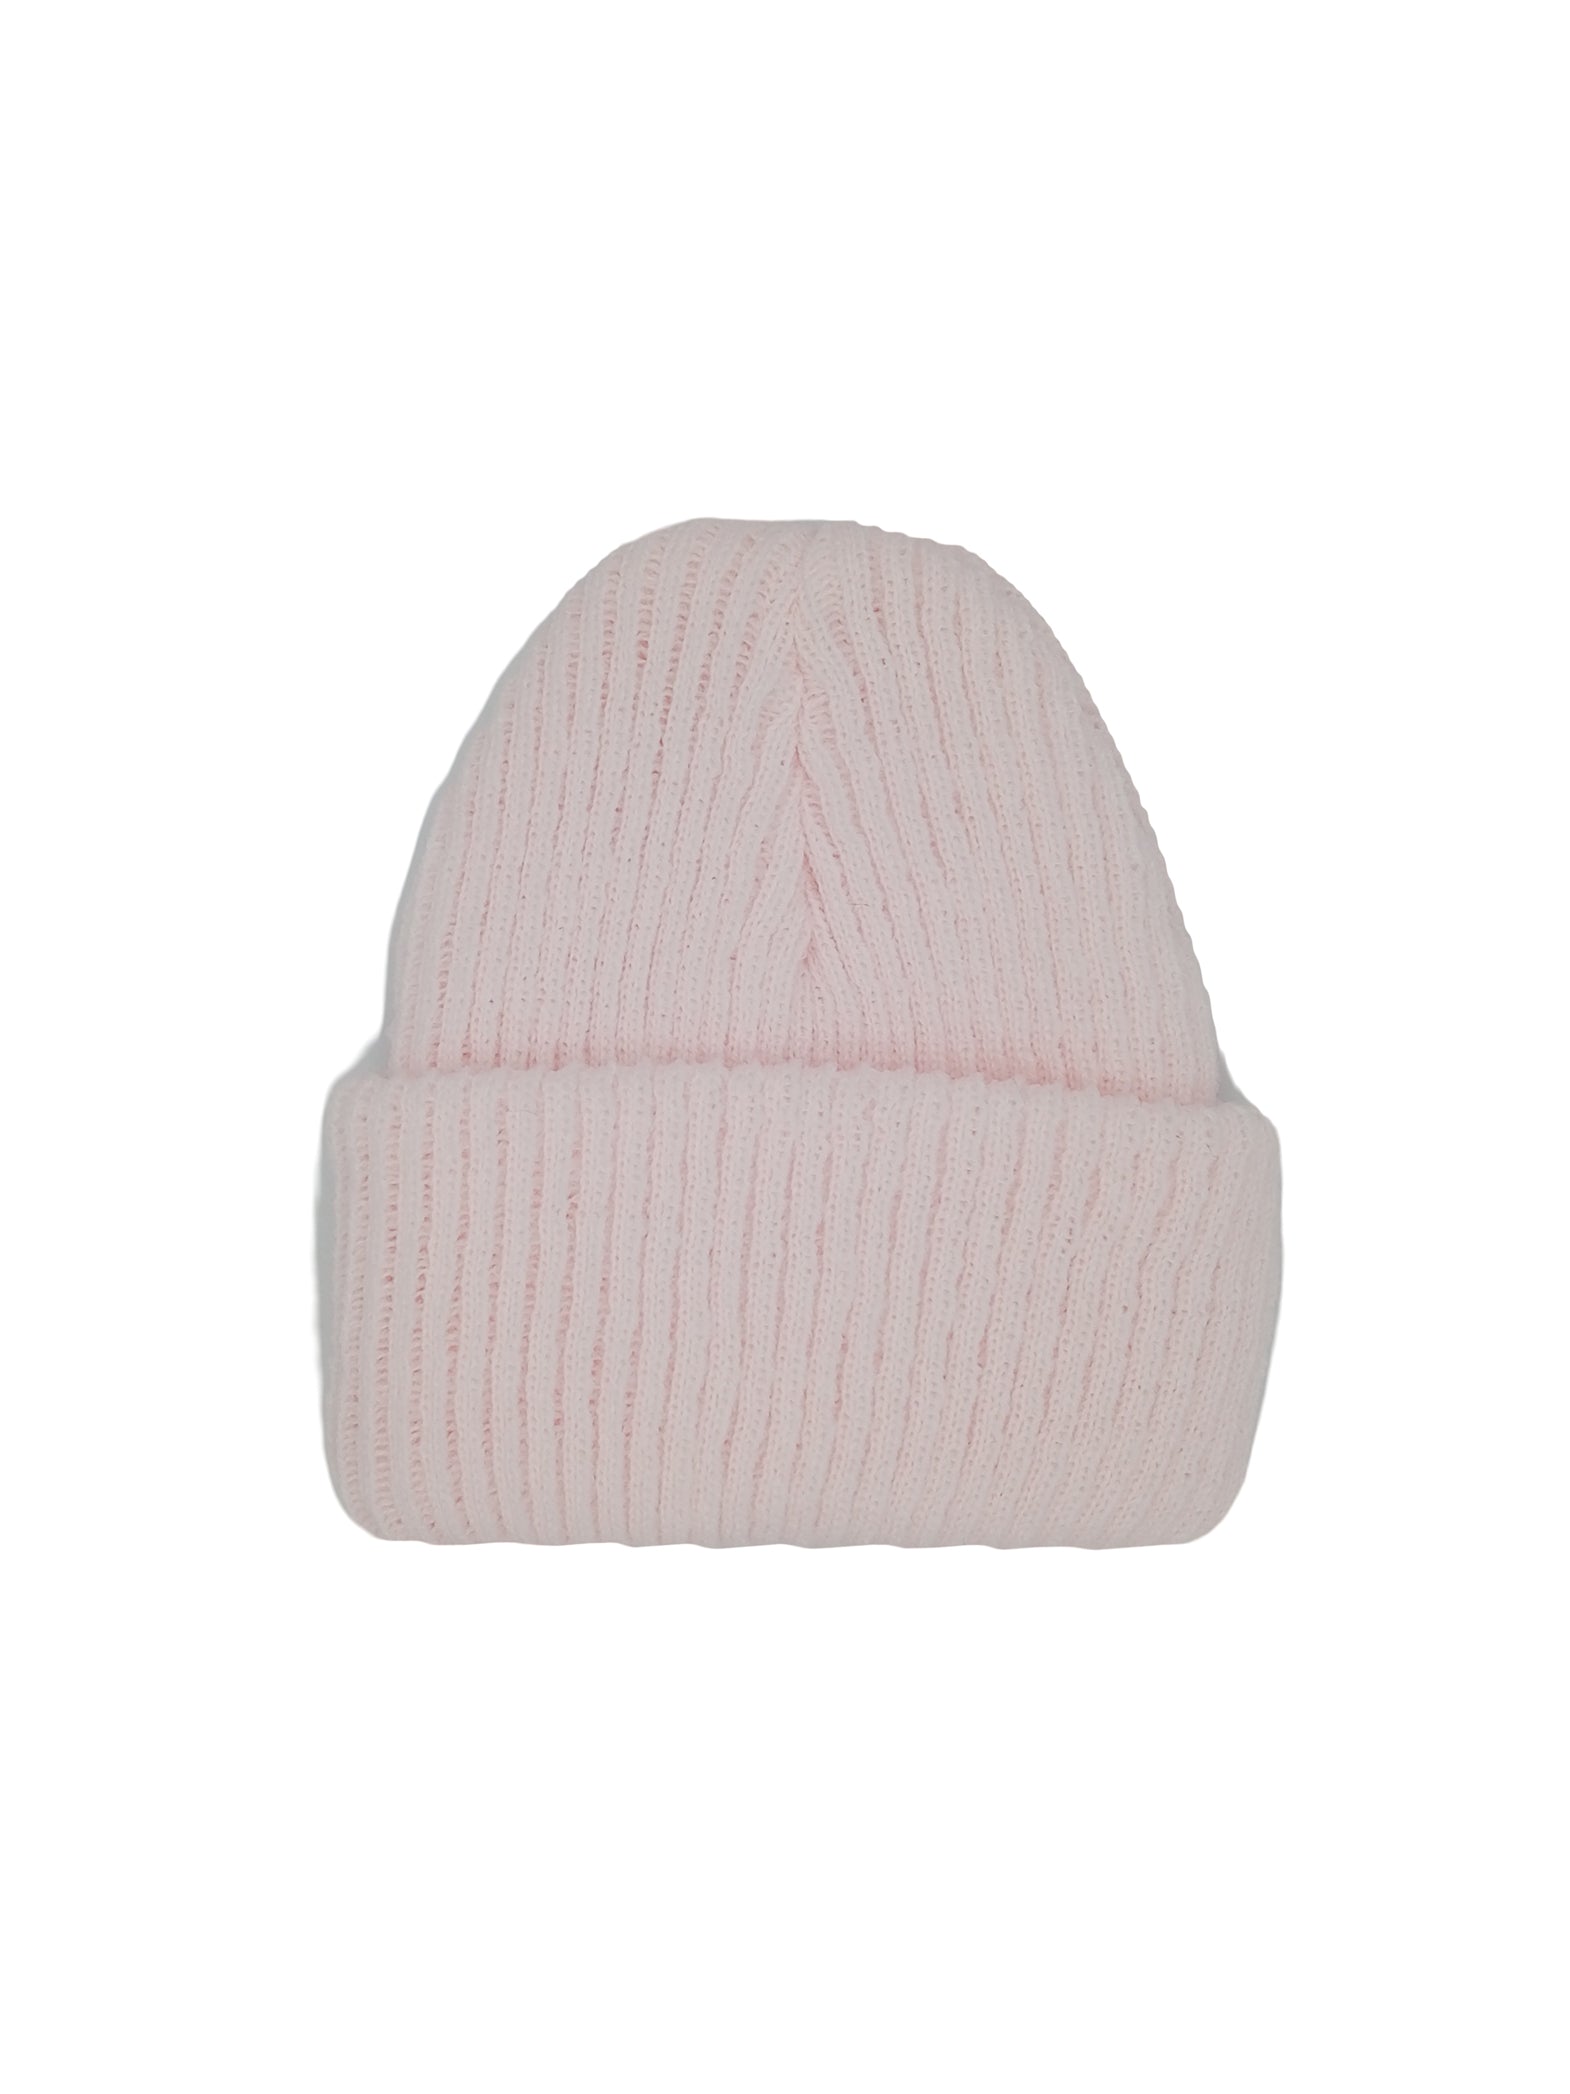 Premature Baby Pink Knitted Hat - Hat - Little Mouse Baby Clothing and Gifts Ltd